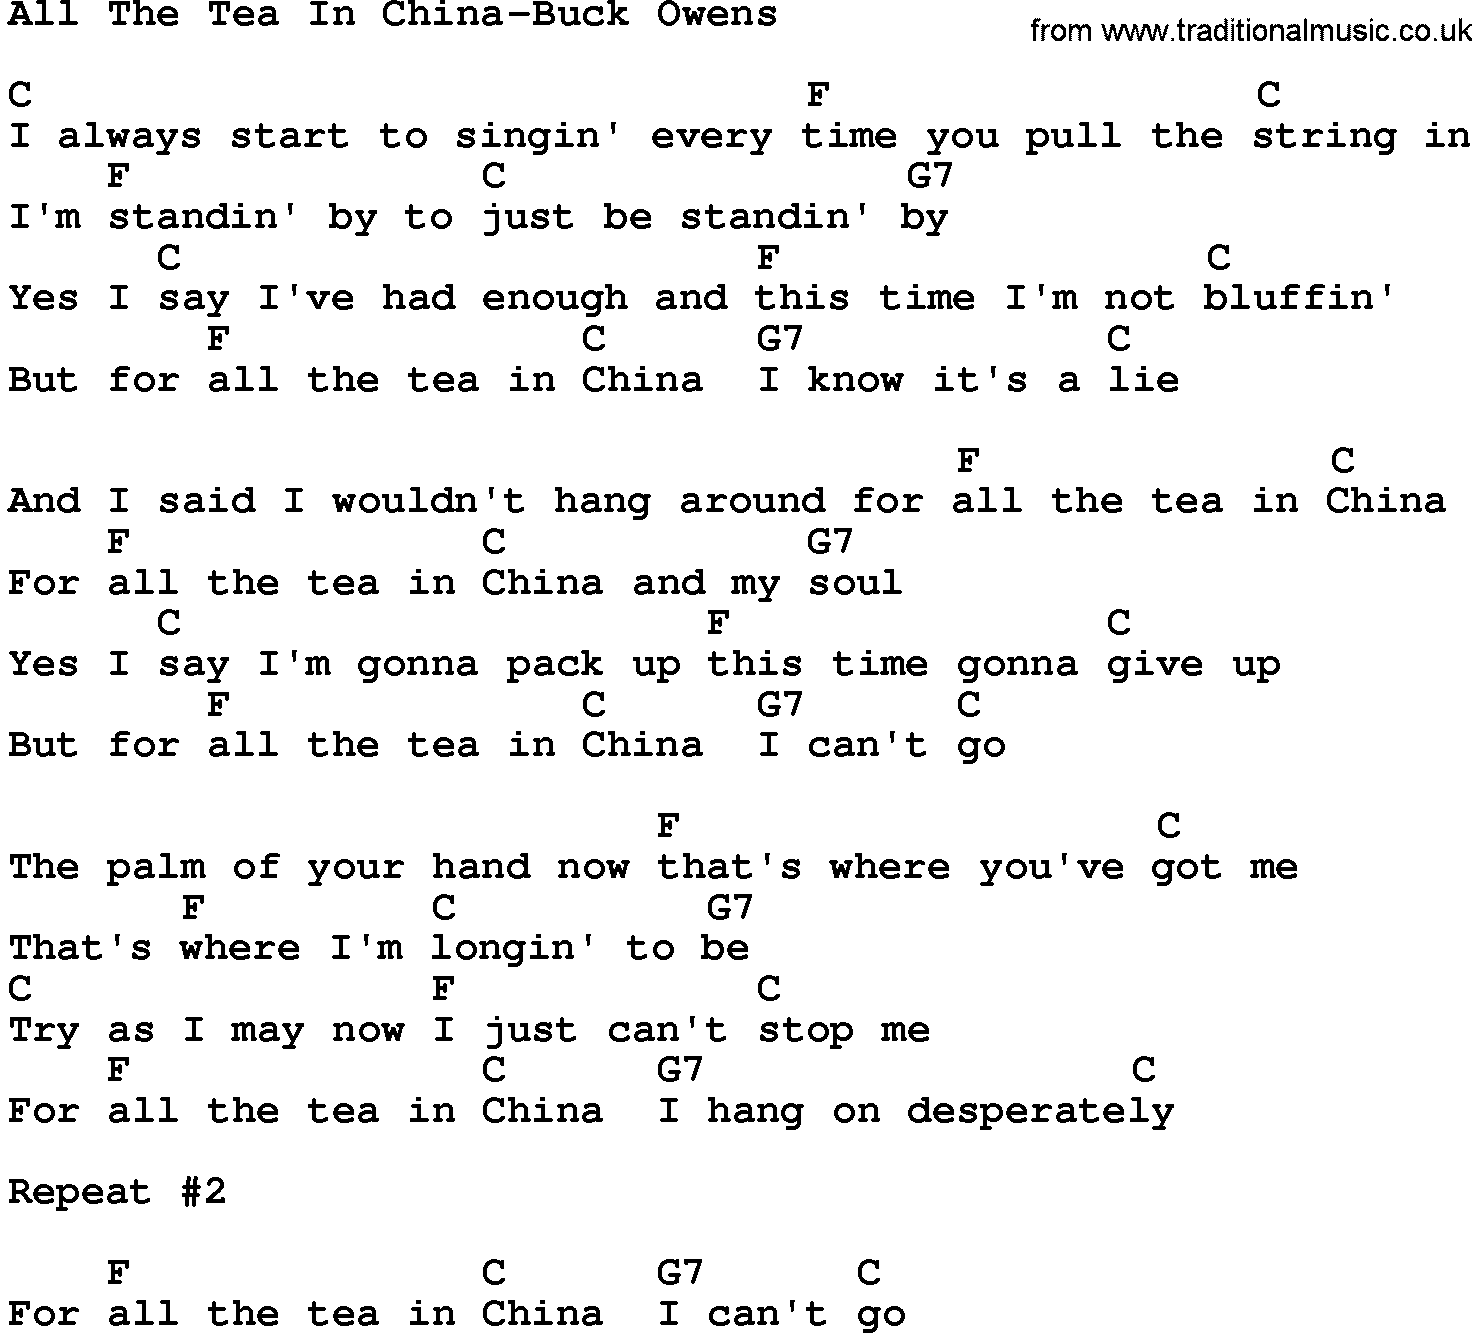 Country music song: All The Tea In China-Buck Owens lyrics and chords